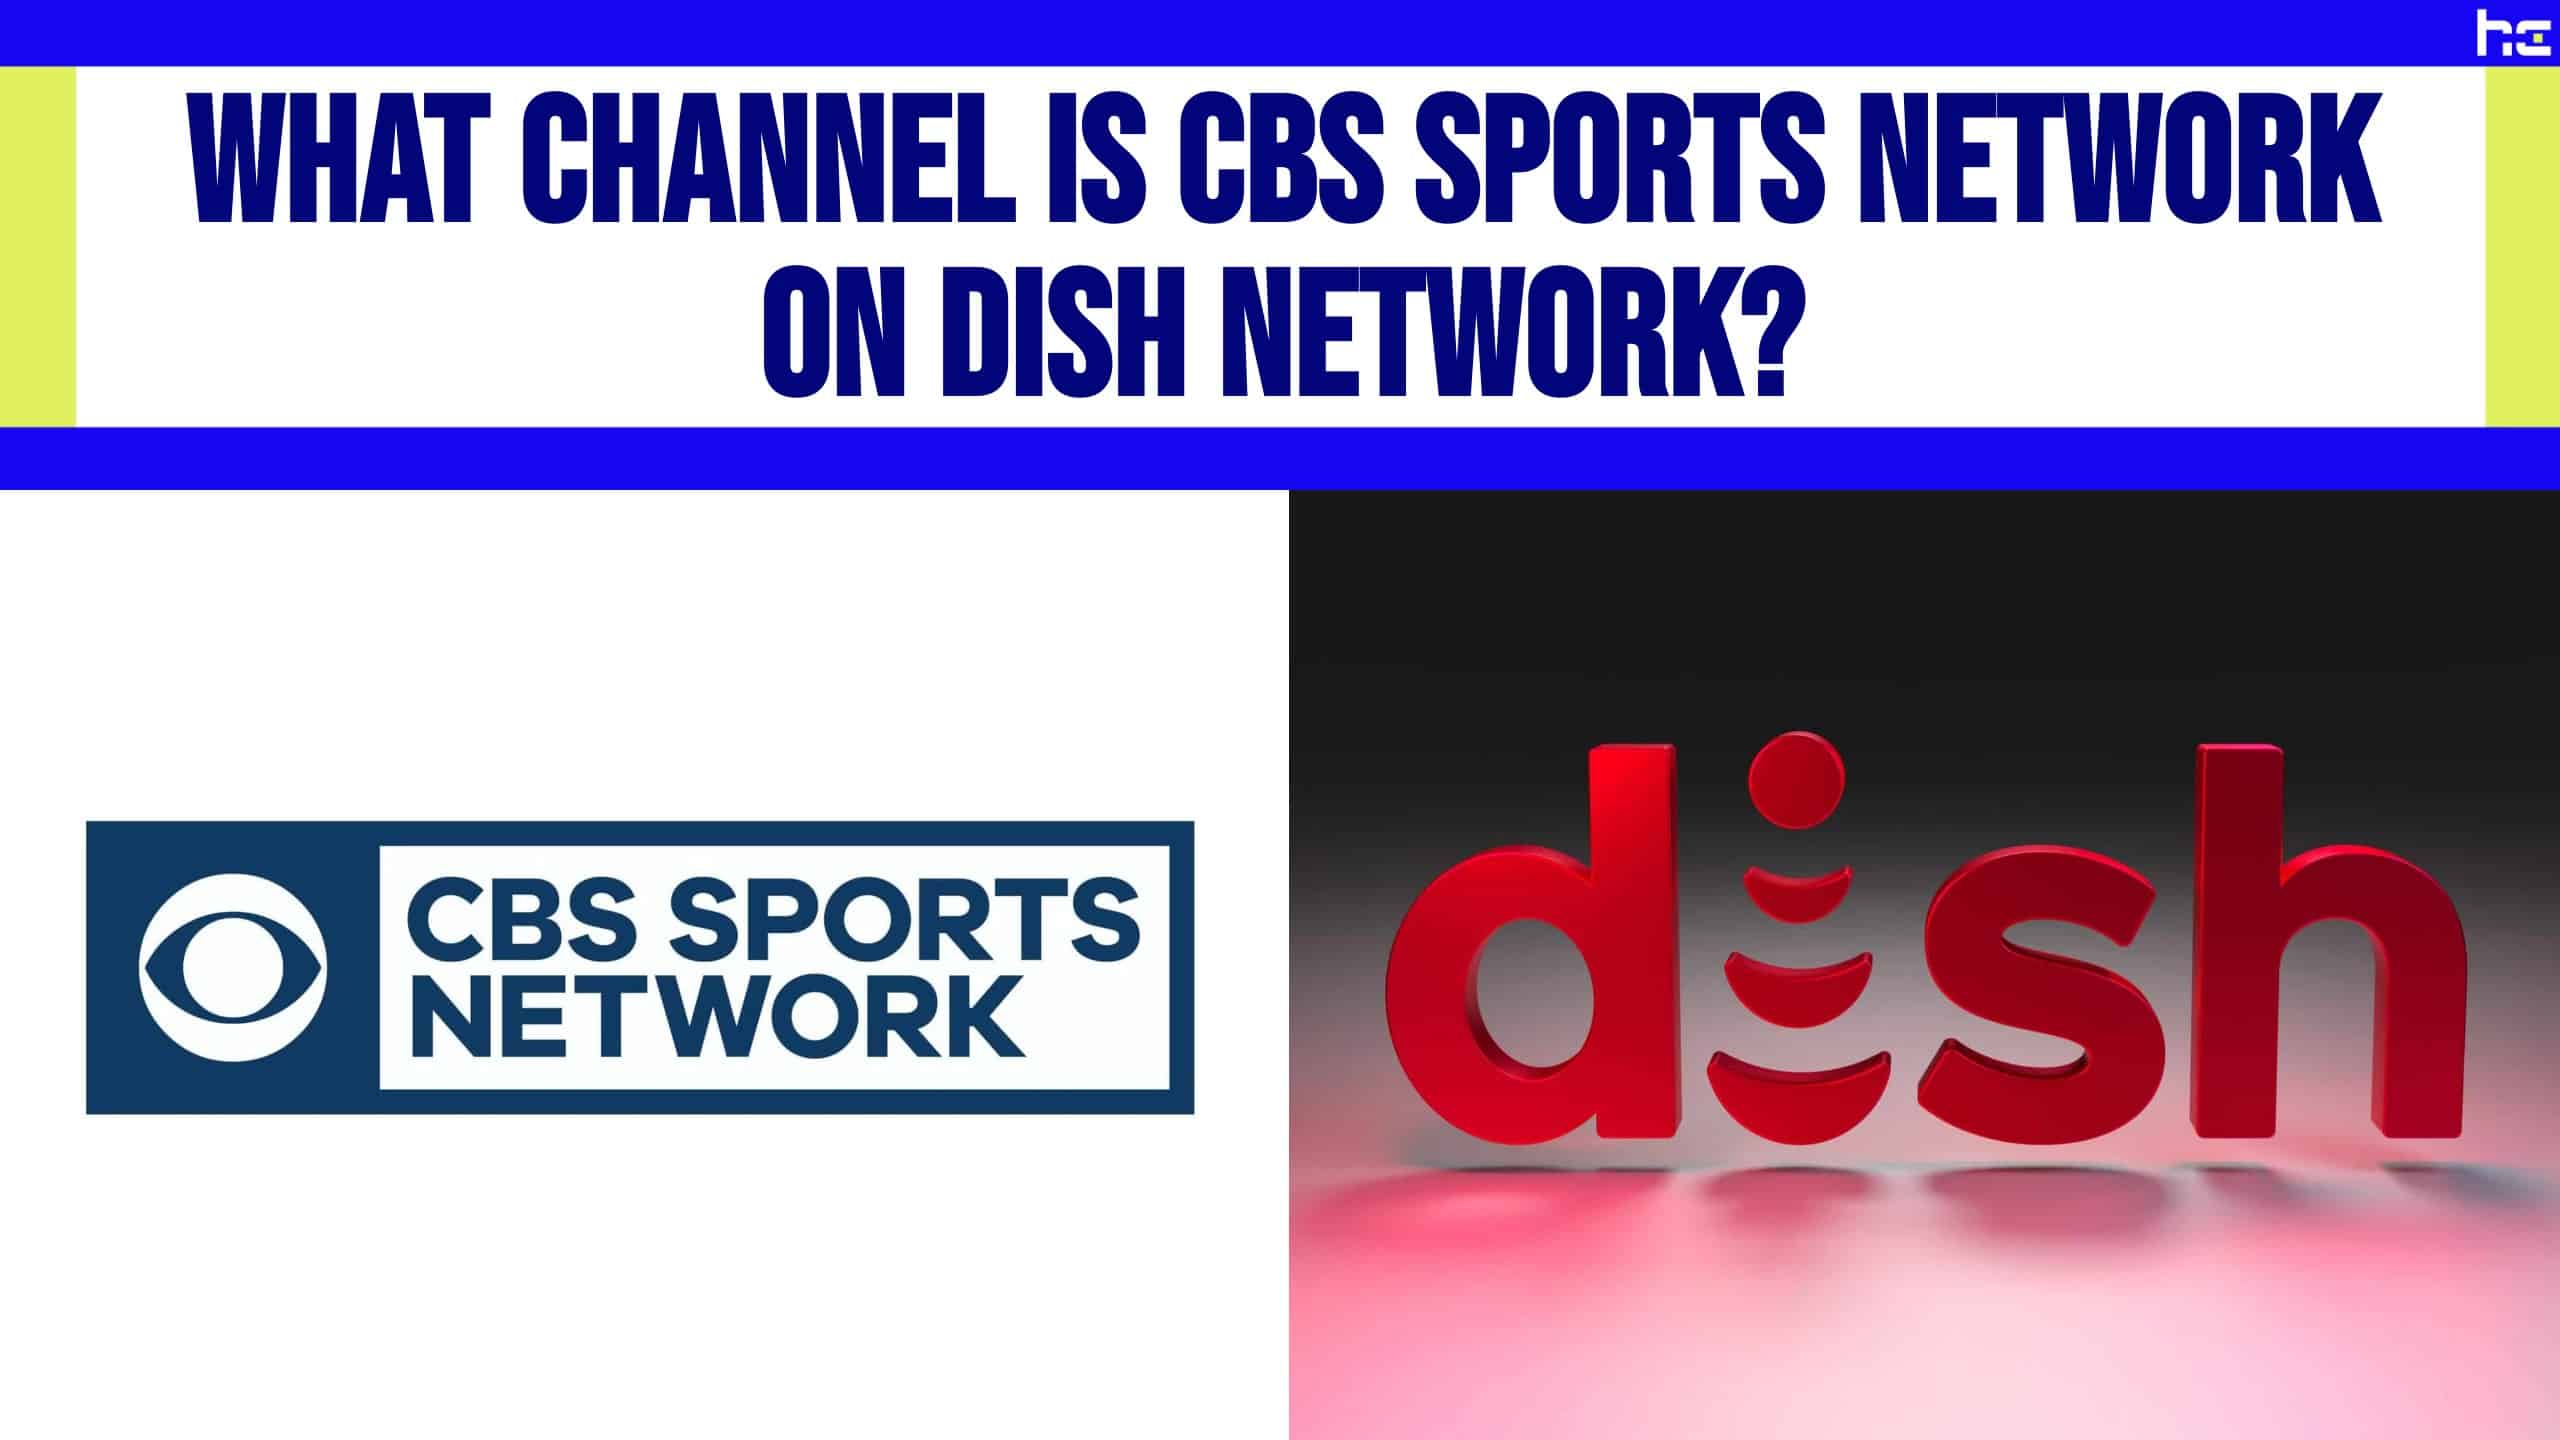 CBS Sports Network and DISH Network logos.